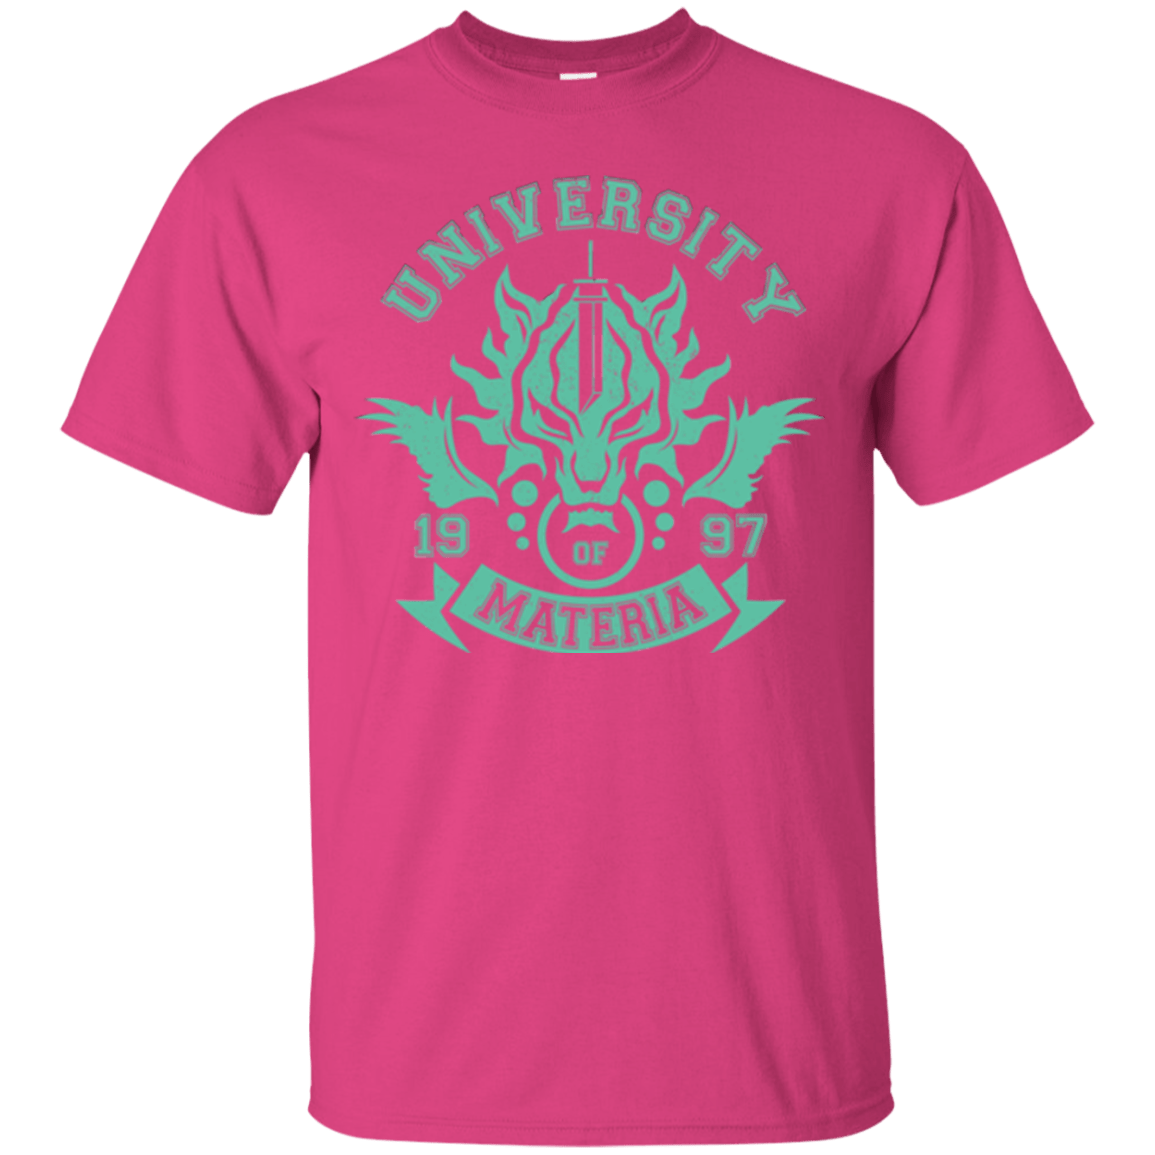 T-Shirts Heliconia / Small University of Materia T-Shirt